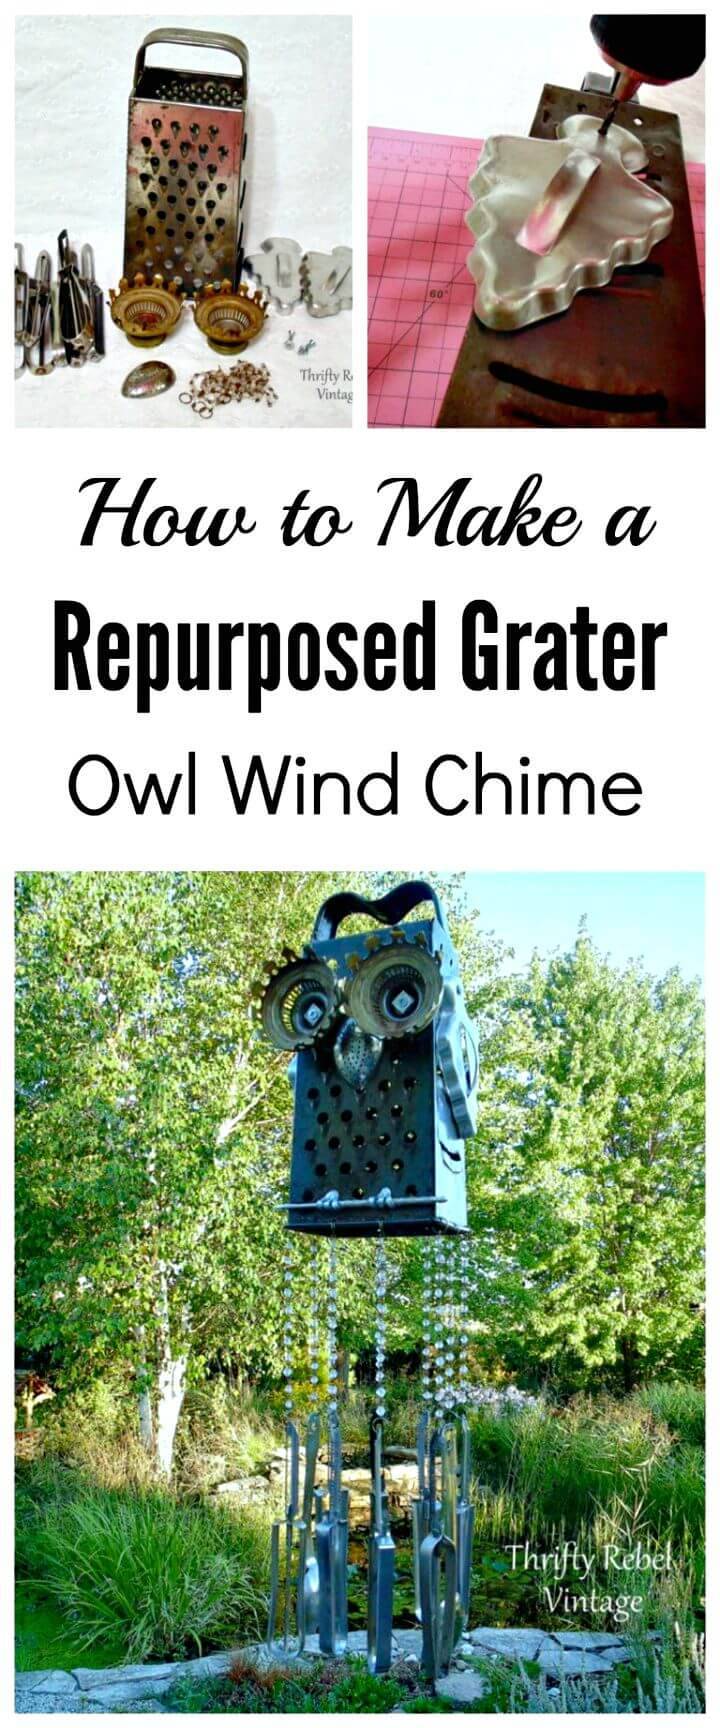 How To Re-purposed Junk Owl Wind Chime Tutorial